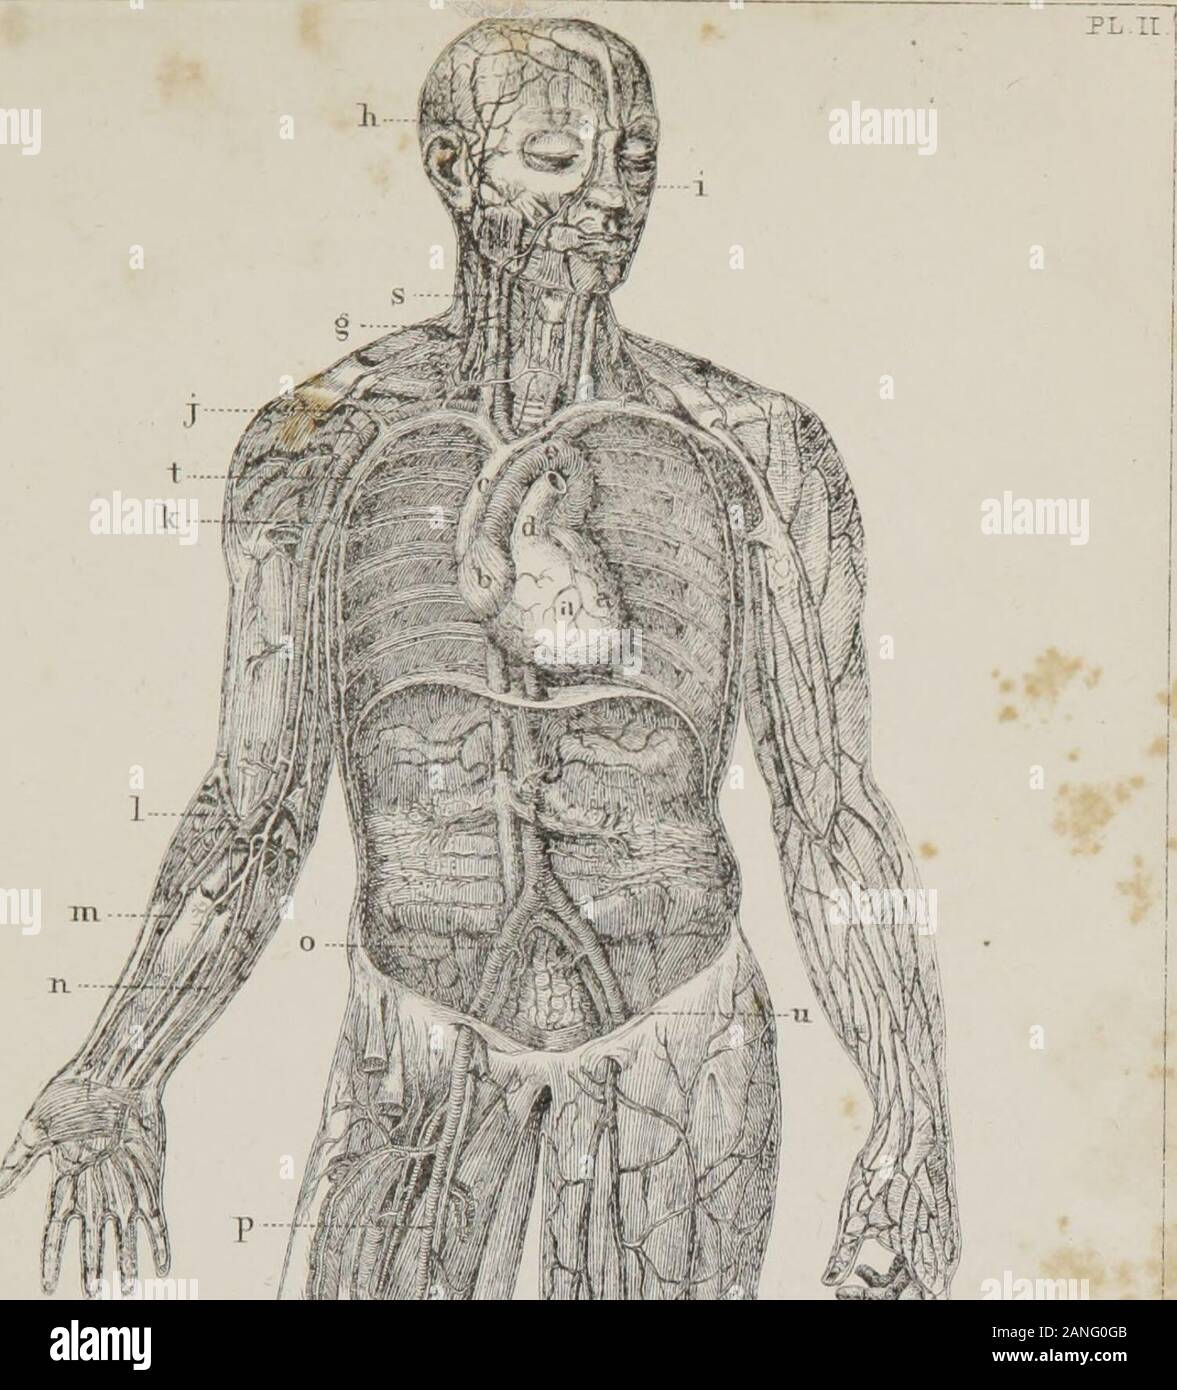 Class-book of physiology : for the use of schools and families : comprising the structure and functions of the organs of man, illustrated by comparative reference to those of inferior animals . ries, the descending aorta gives off several importantbranches ; as the cceliac artery, from which the stomach and liver are supplied ; the renalartery, which goes to the kidneys, and the mesenteric artery, to the intestines; besidesmany other sub-divisious in various parts of its course. The branches of the vena cava generally accompany those of the aorta in their distribu-tion, as shown in the figure, Stock Photo